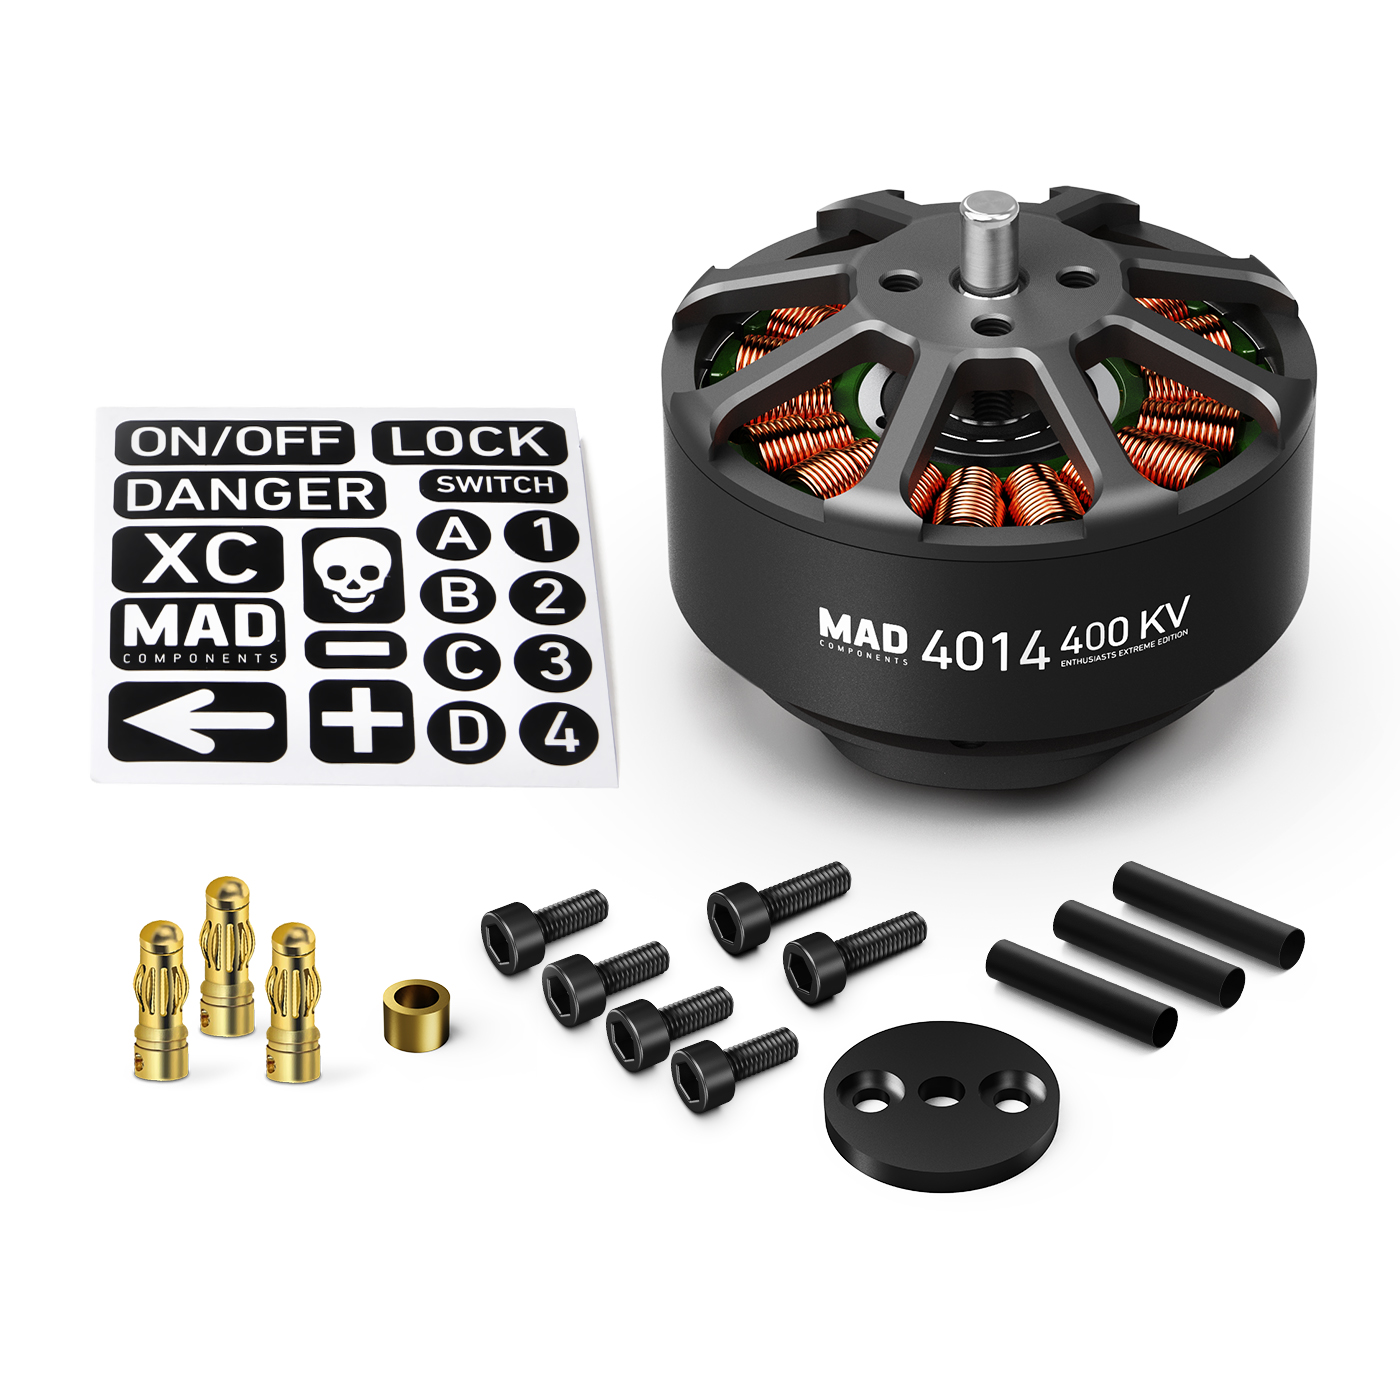 MAD 4014 EEE brushless motor for the long-range inspection drone mapping drone surveying drone quadcopter hexcopter mulitirotor